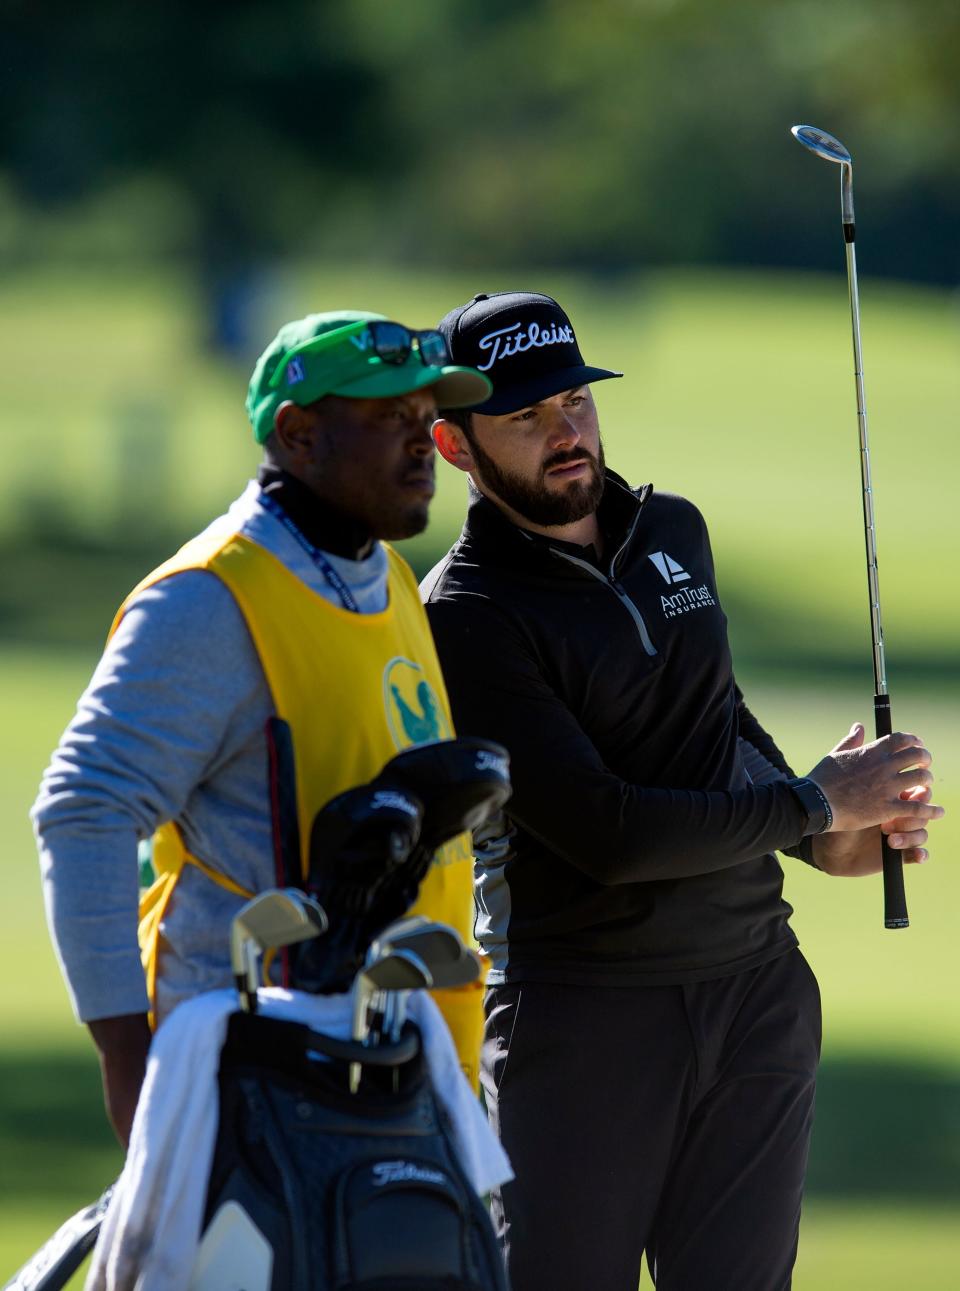 Hayden Buckley, right, of Tupleo, Miss., confers with his caddy before putting on the 9th in the first round of tournament play during the Sanderson Farms Championship at the Country Club of Jackson in Jackson, Miss., Thursday, Sept. 29, 2022.